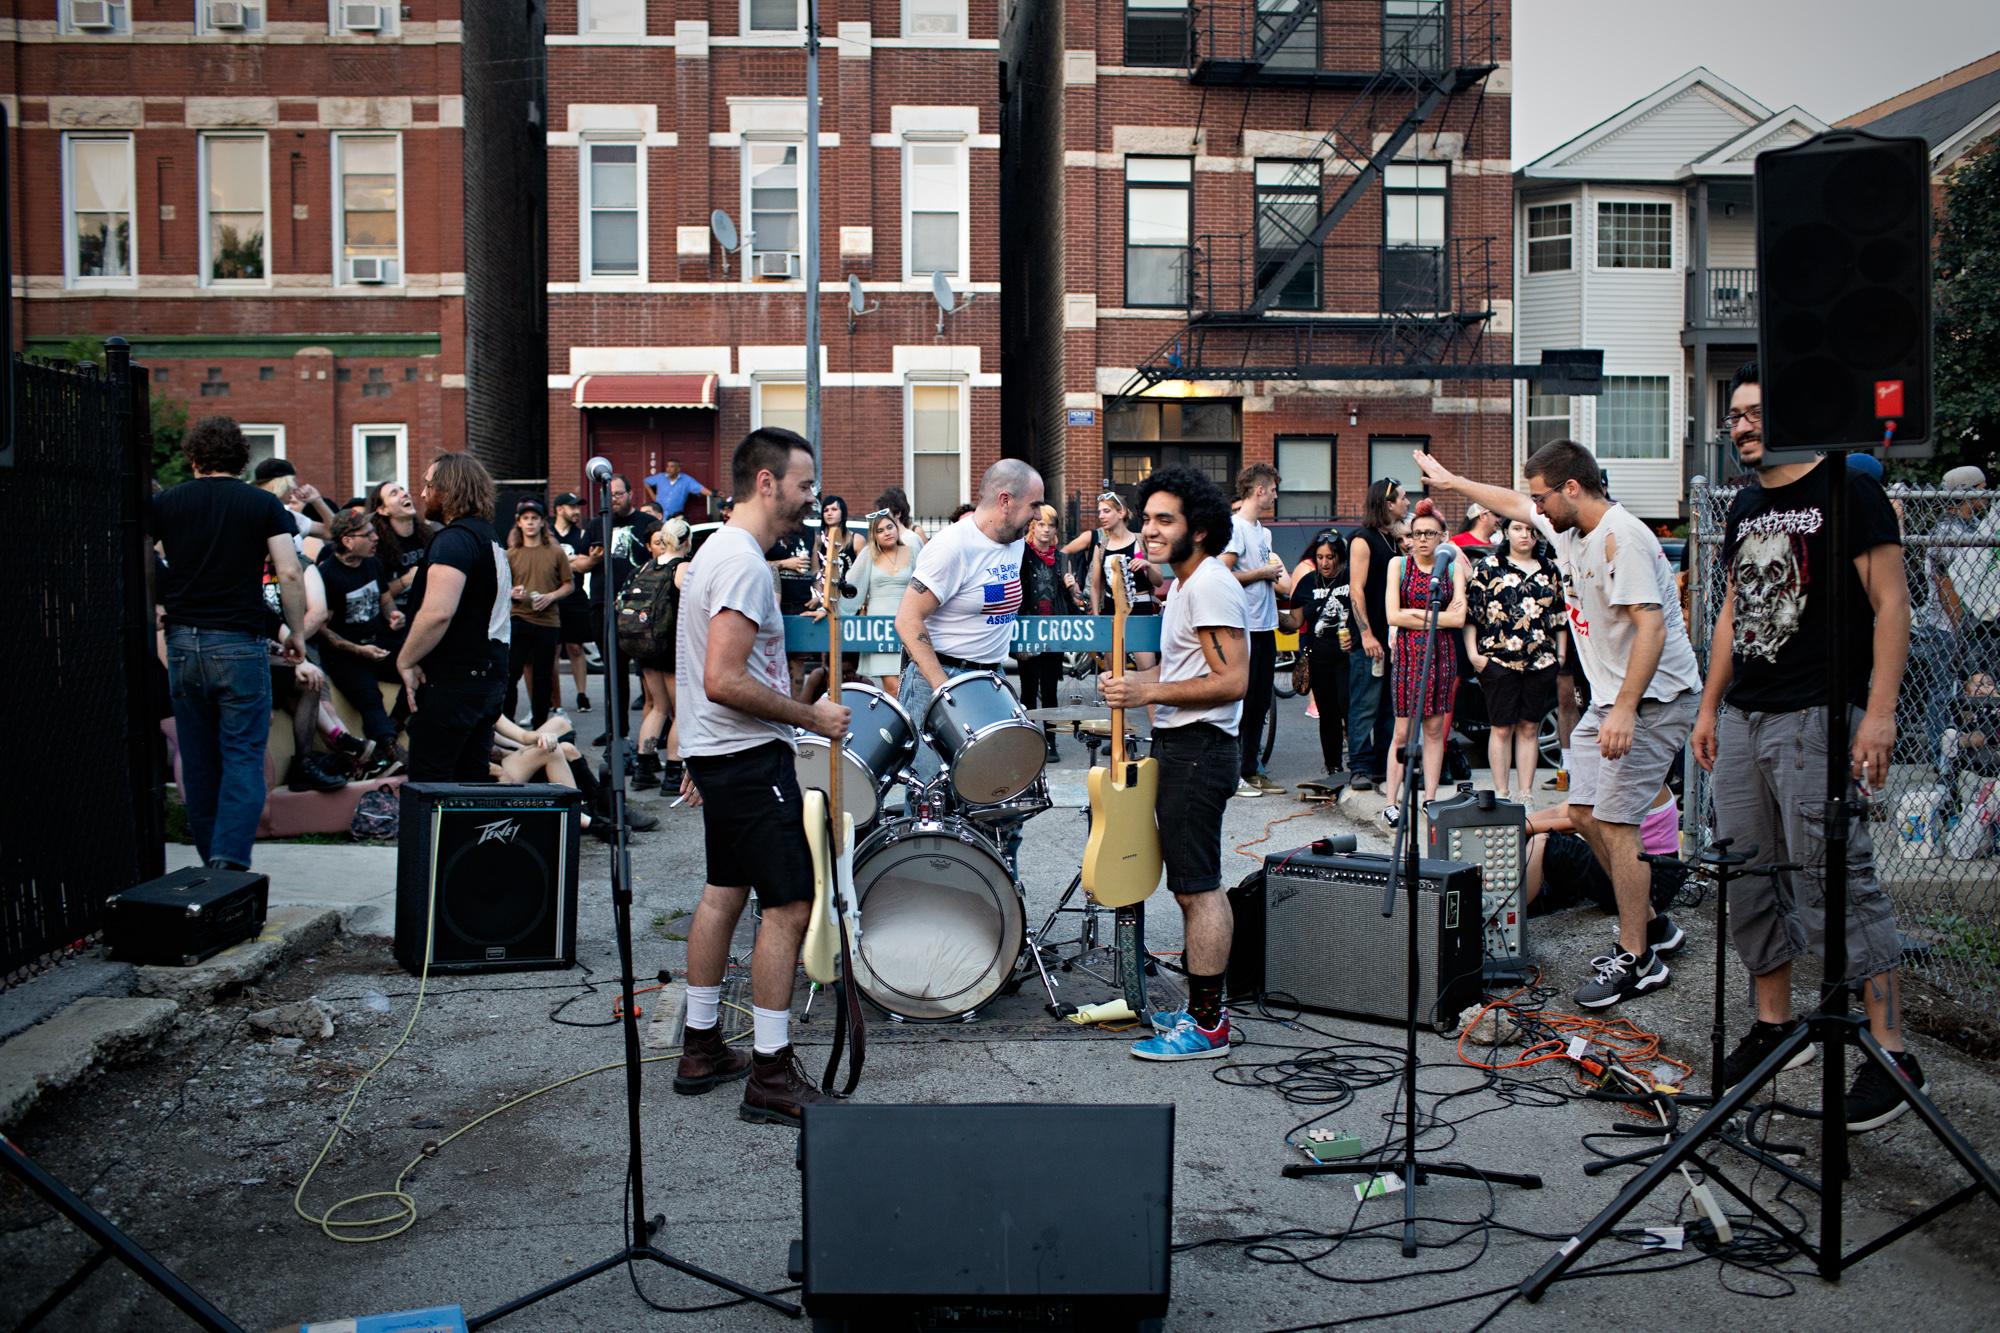 Member of a punk band prepare to play in an alley in Pilsen celebrating the fourth of July.